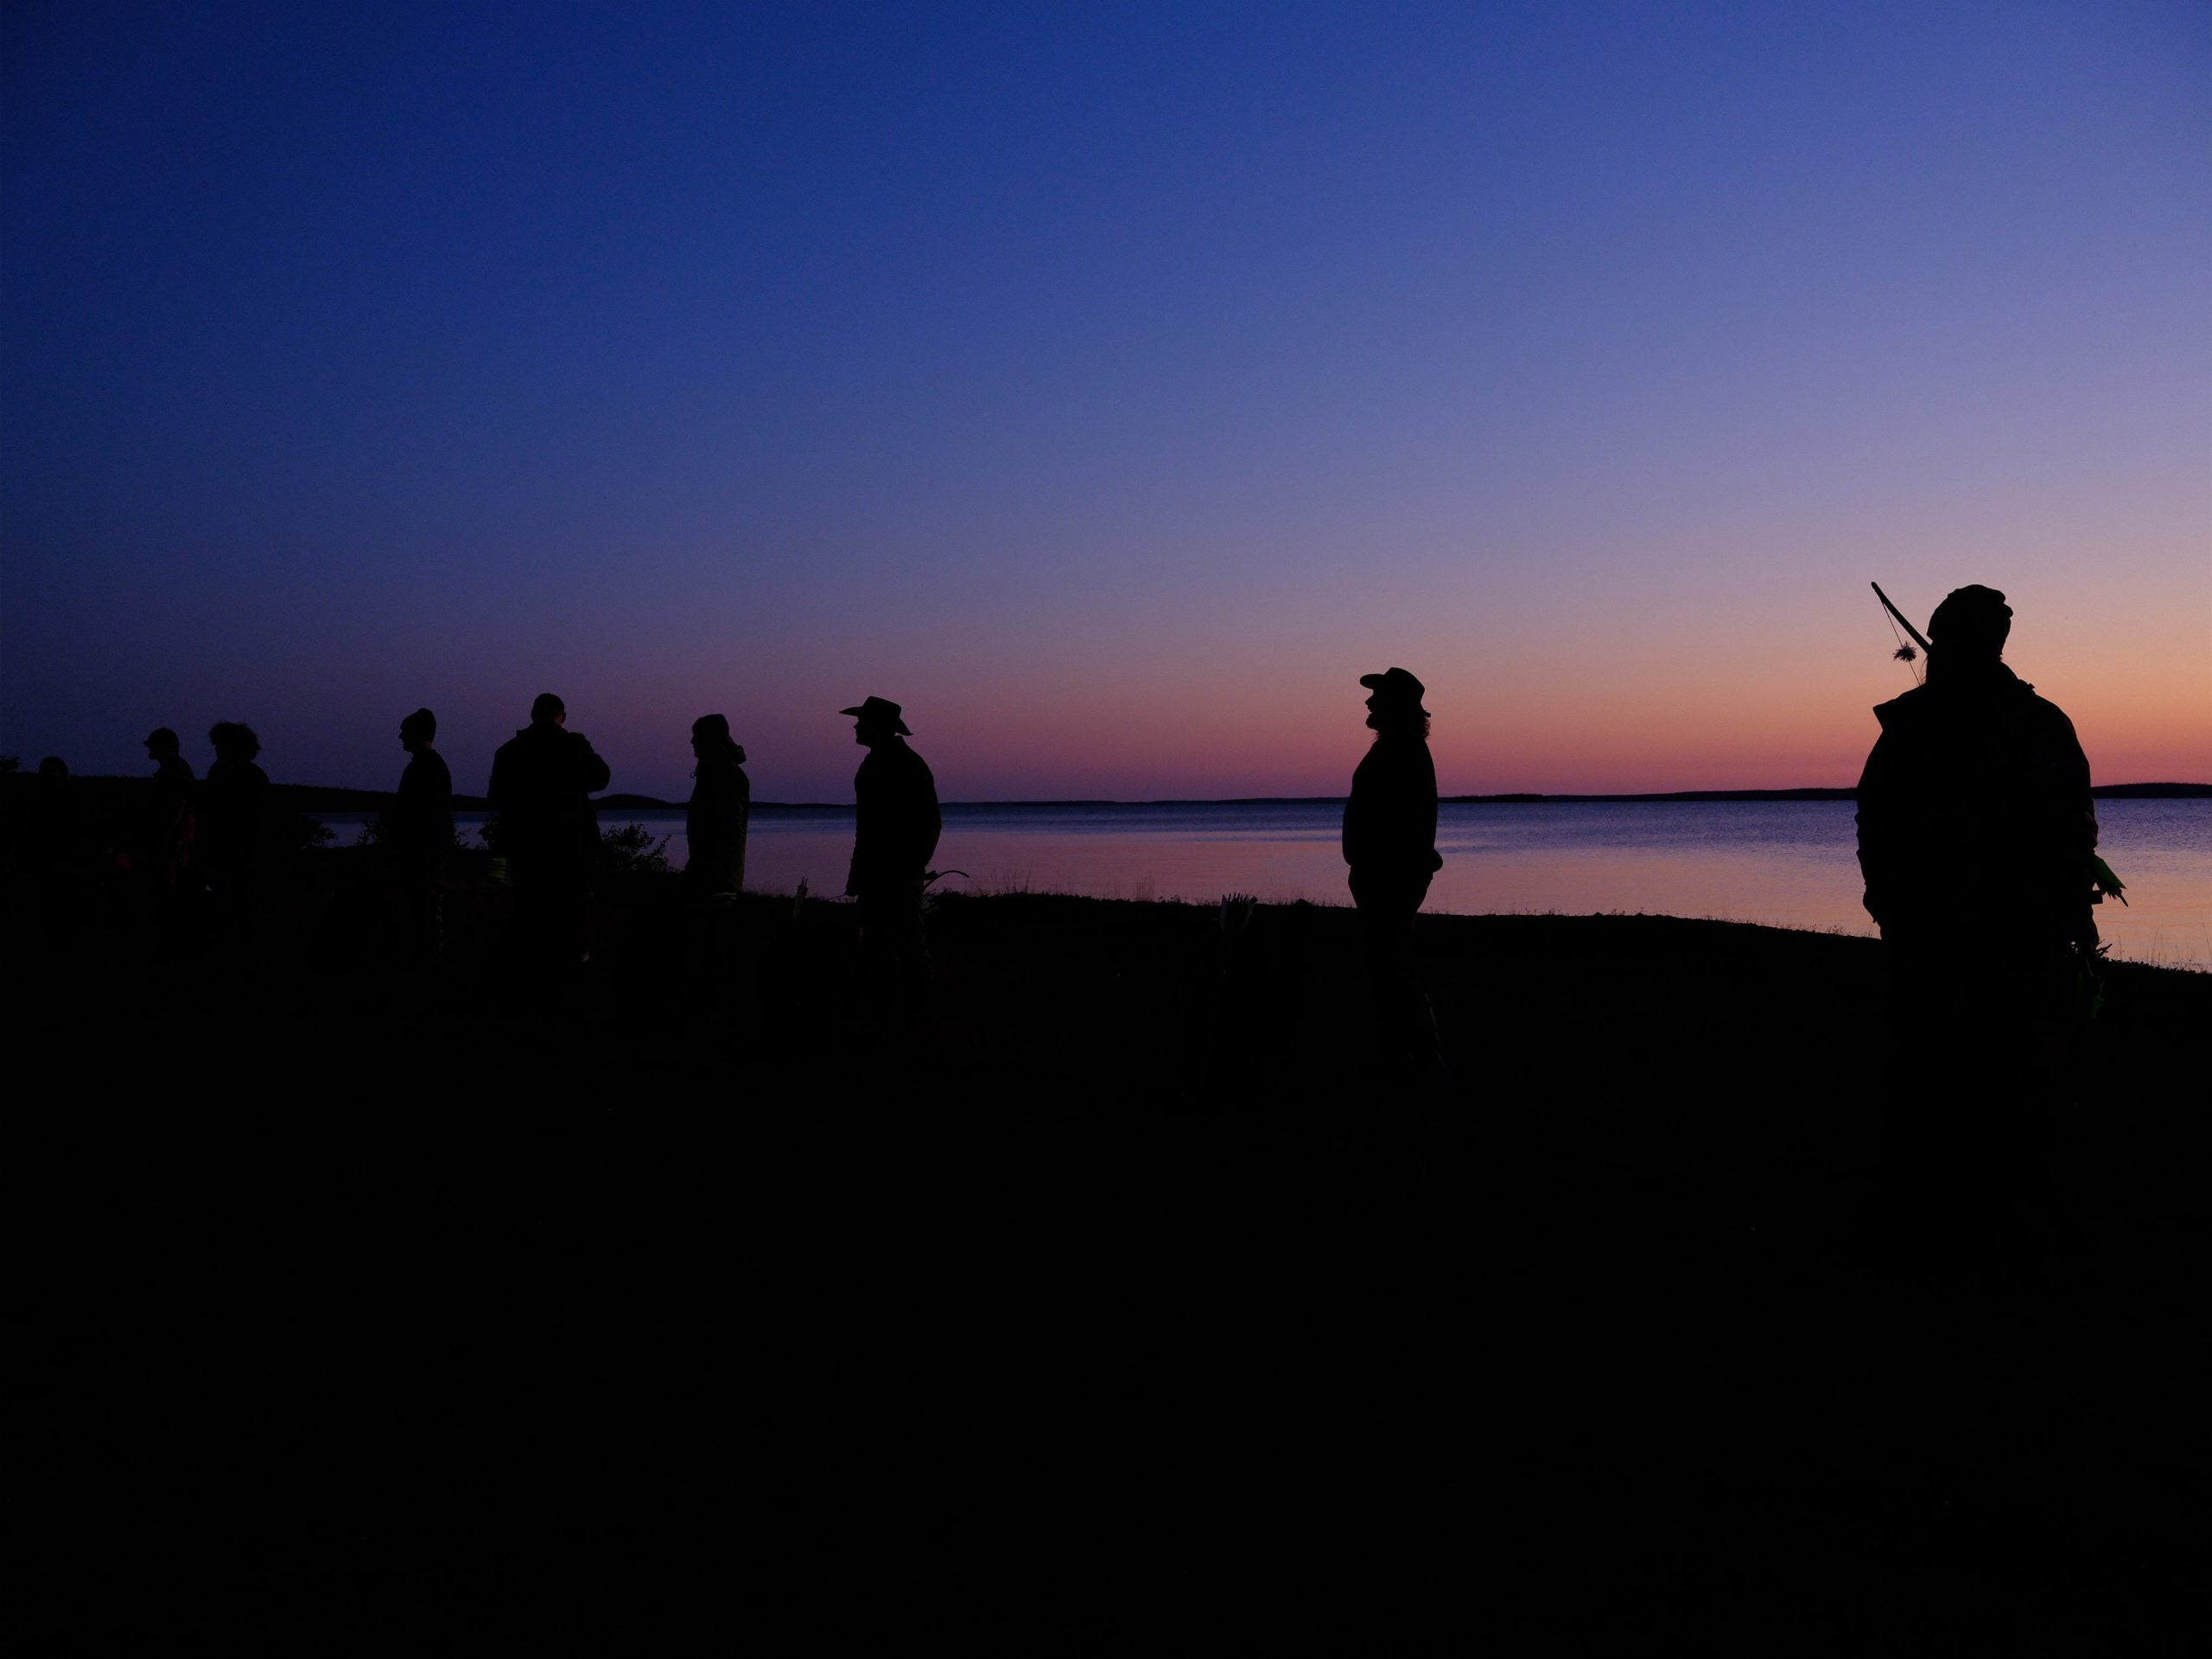 The 'Alone' Season 10 cast silhouetted against a sky at dusk